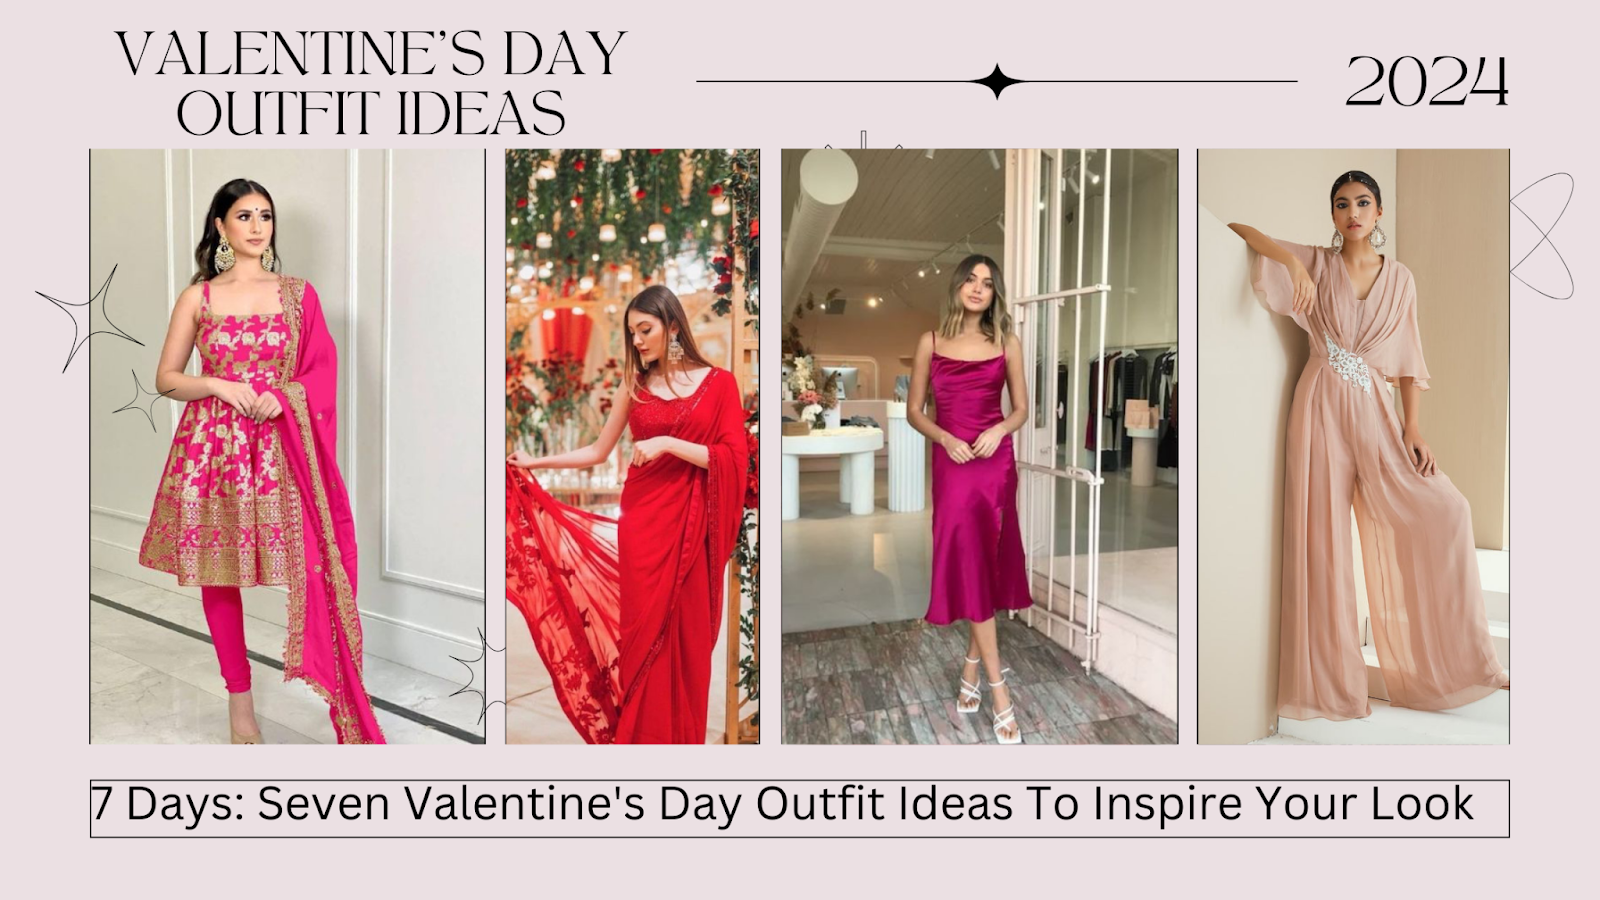 7 Days: Seven Valentine’s Day Outfit Ideas To Inspire Your Look